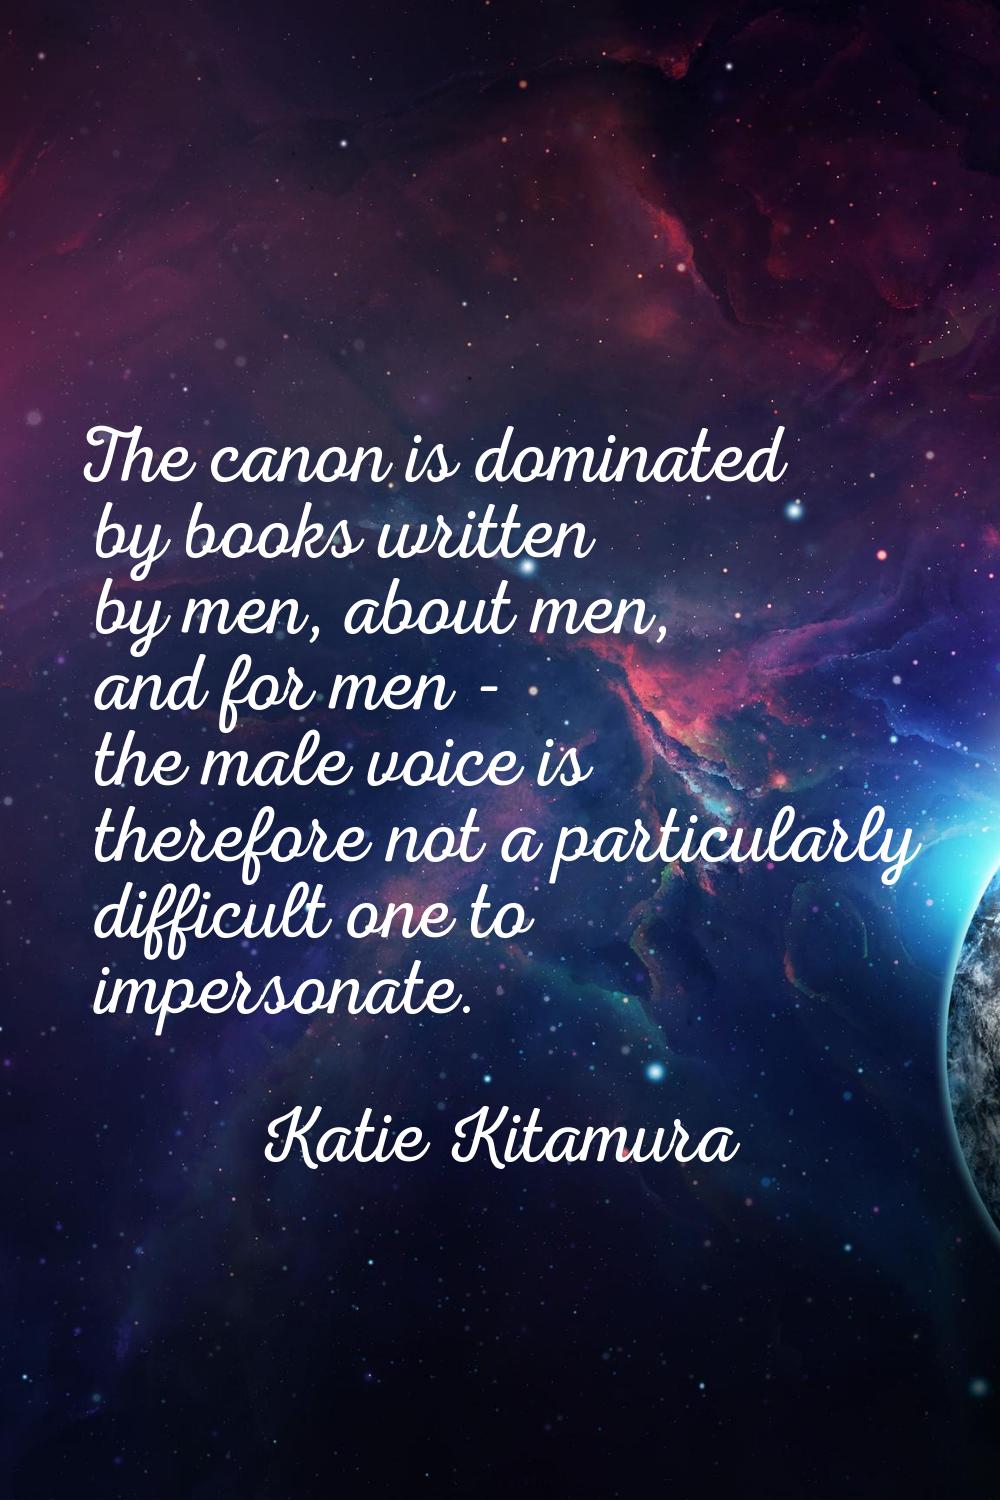 The canon is dominated by books written by men, about men, and for men - the male voice is therefor